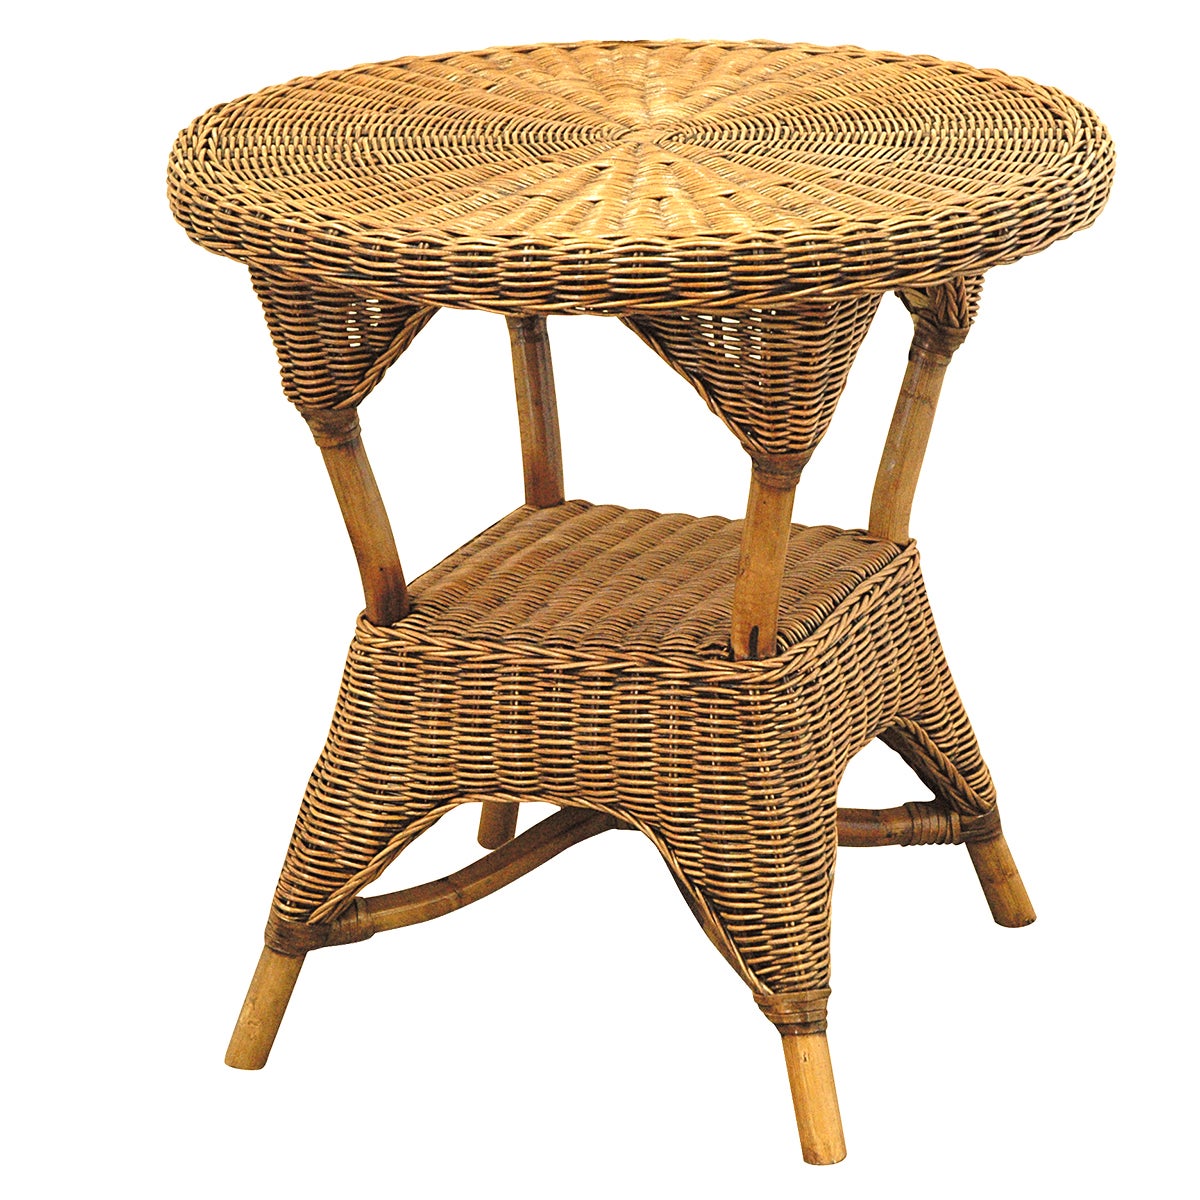 Bermuda Cane/Rattan Round Side Table Antique Brown